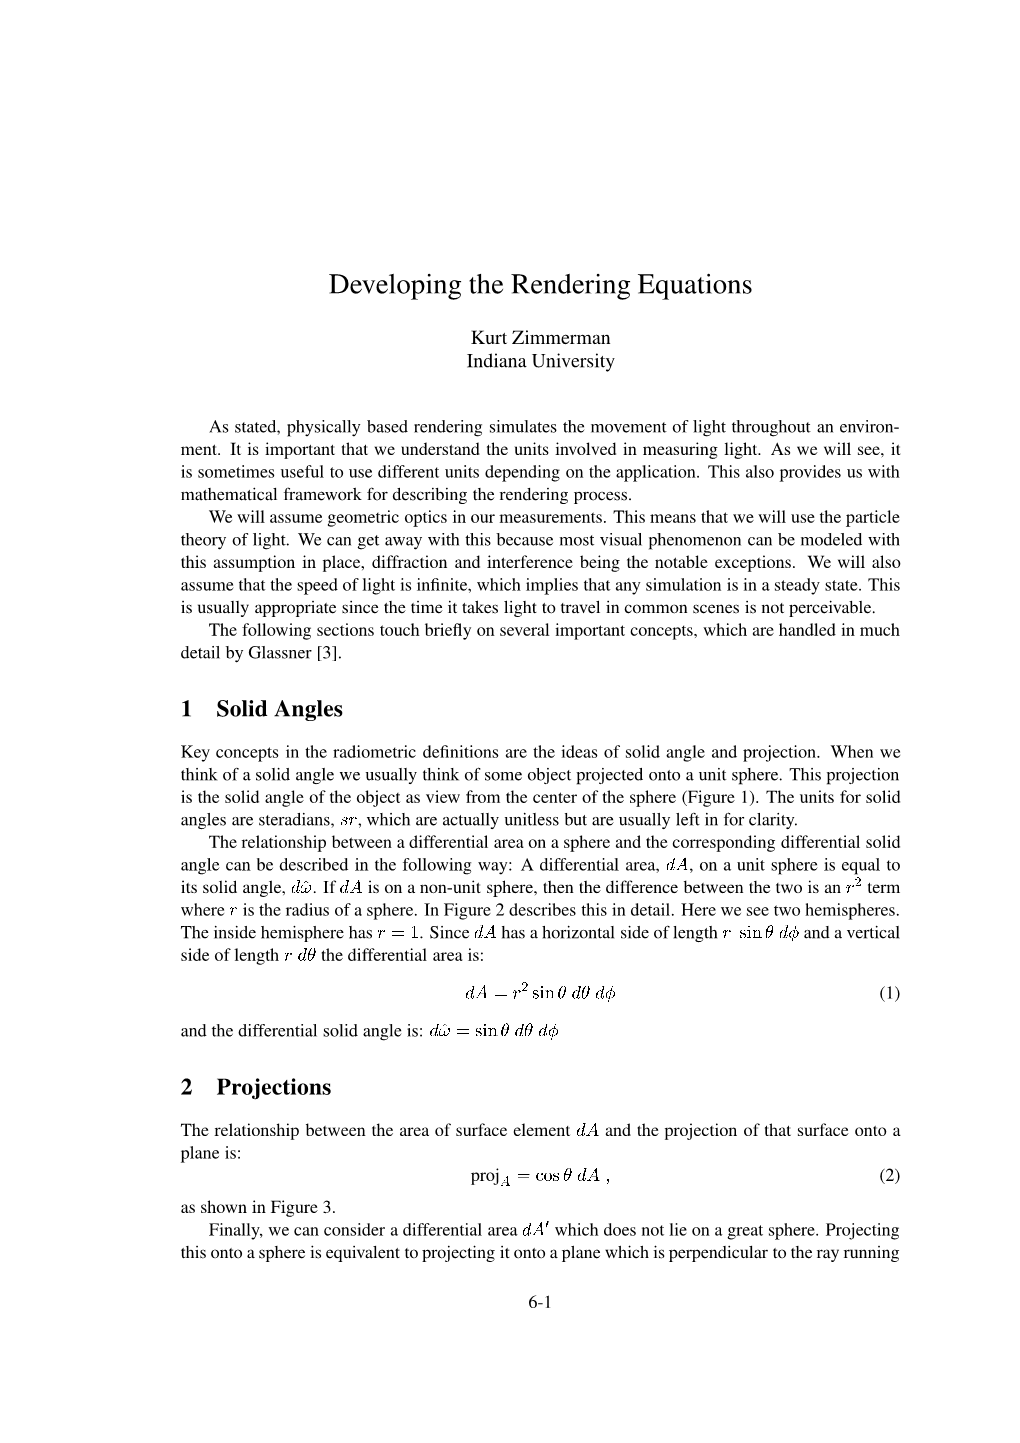 Developing the Rendering Equations